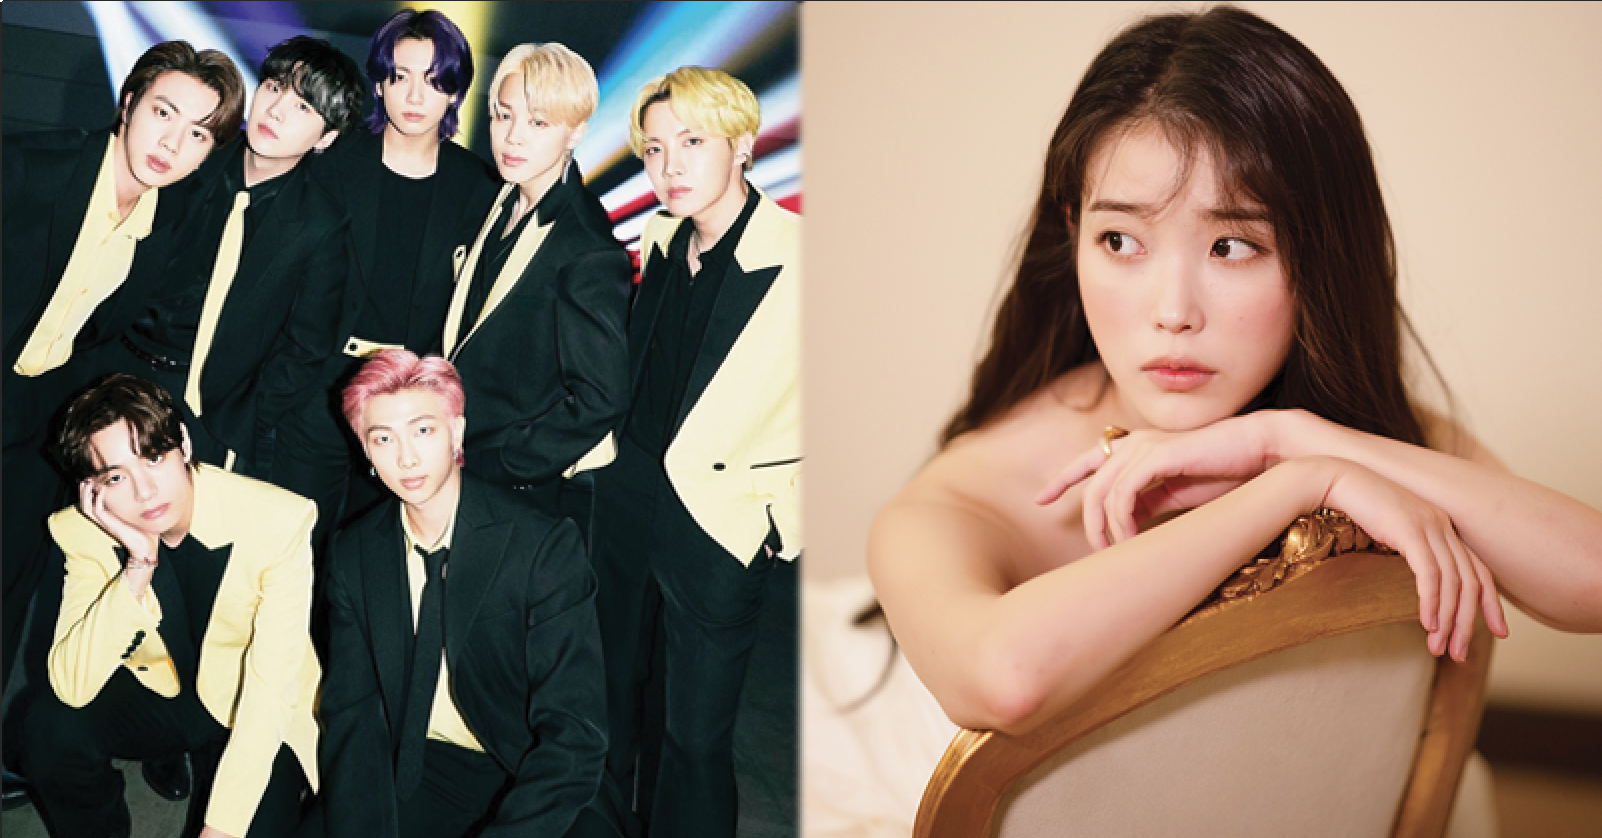 Here Are 2021 'Brand of the Year' Awards Winners With BTS, IU and More